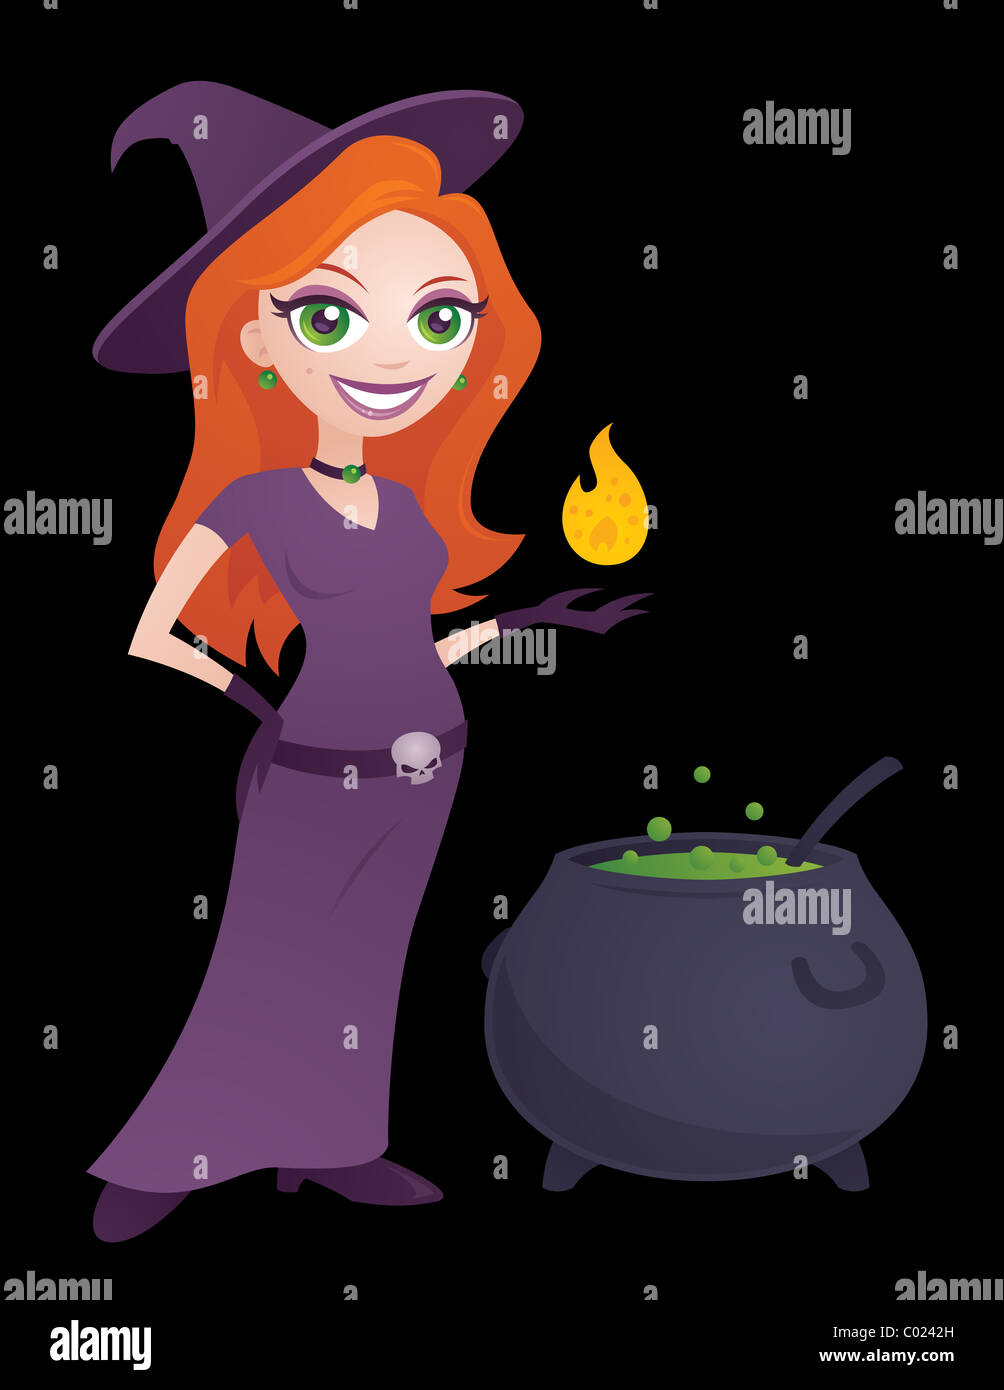 Cartoon illustration of a cute young witch holding a flame and standing next to a bubbling cauldron. Great for Halloween. Stock Photo